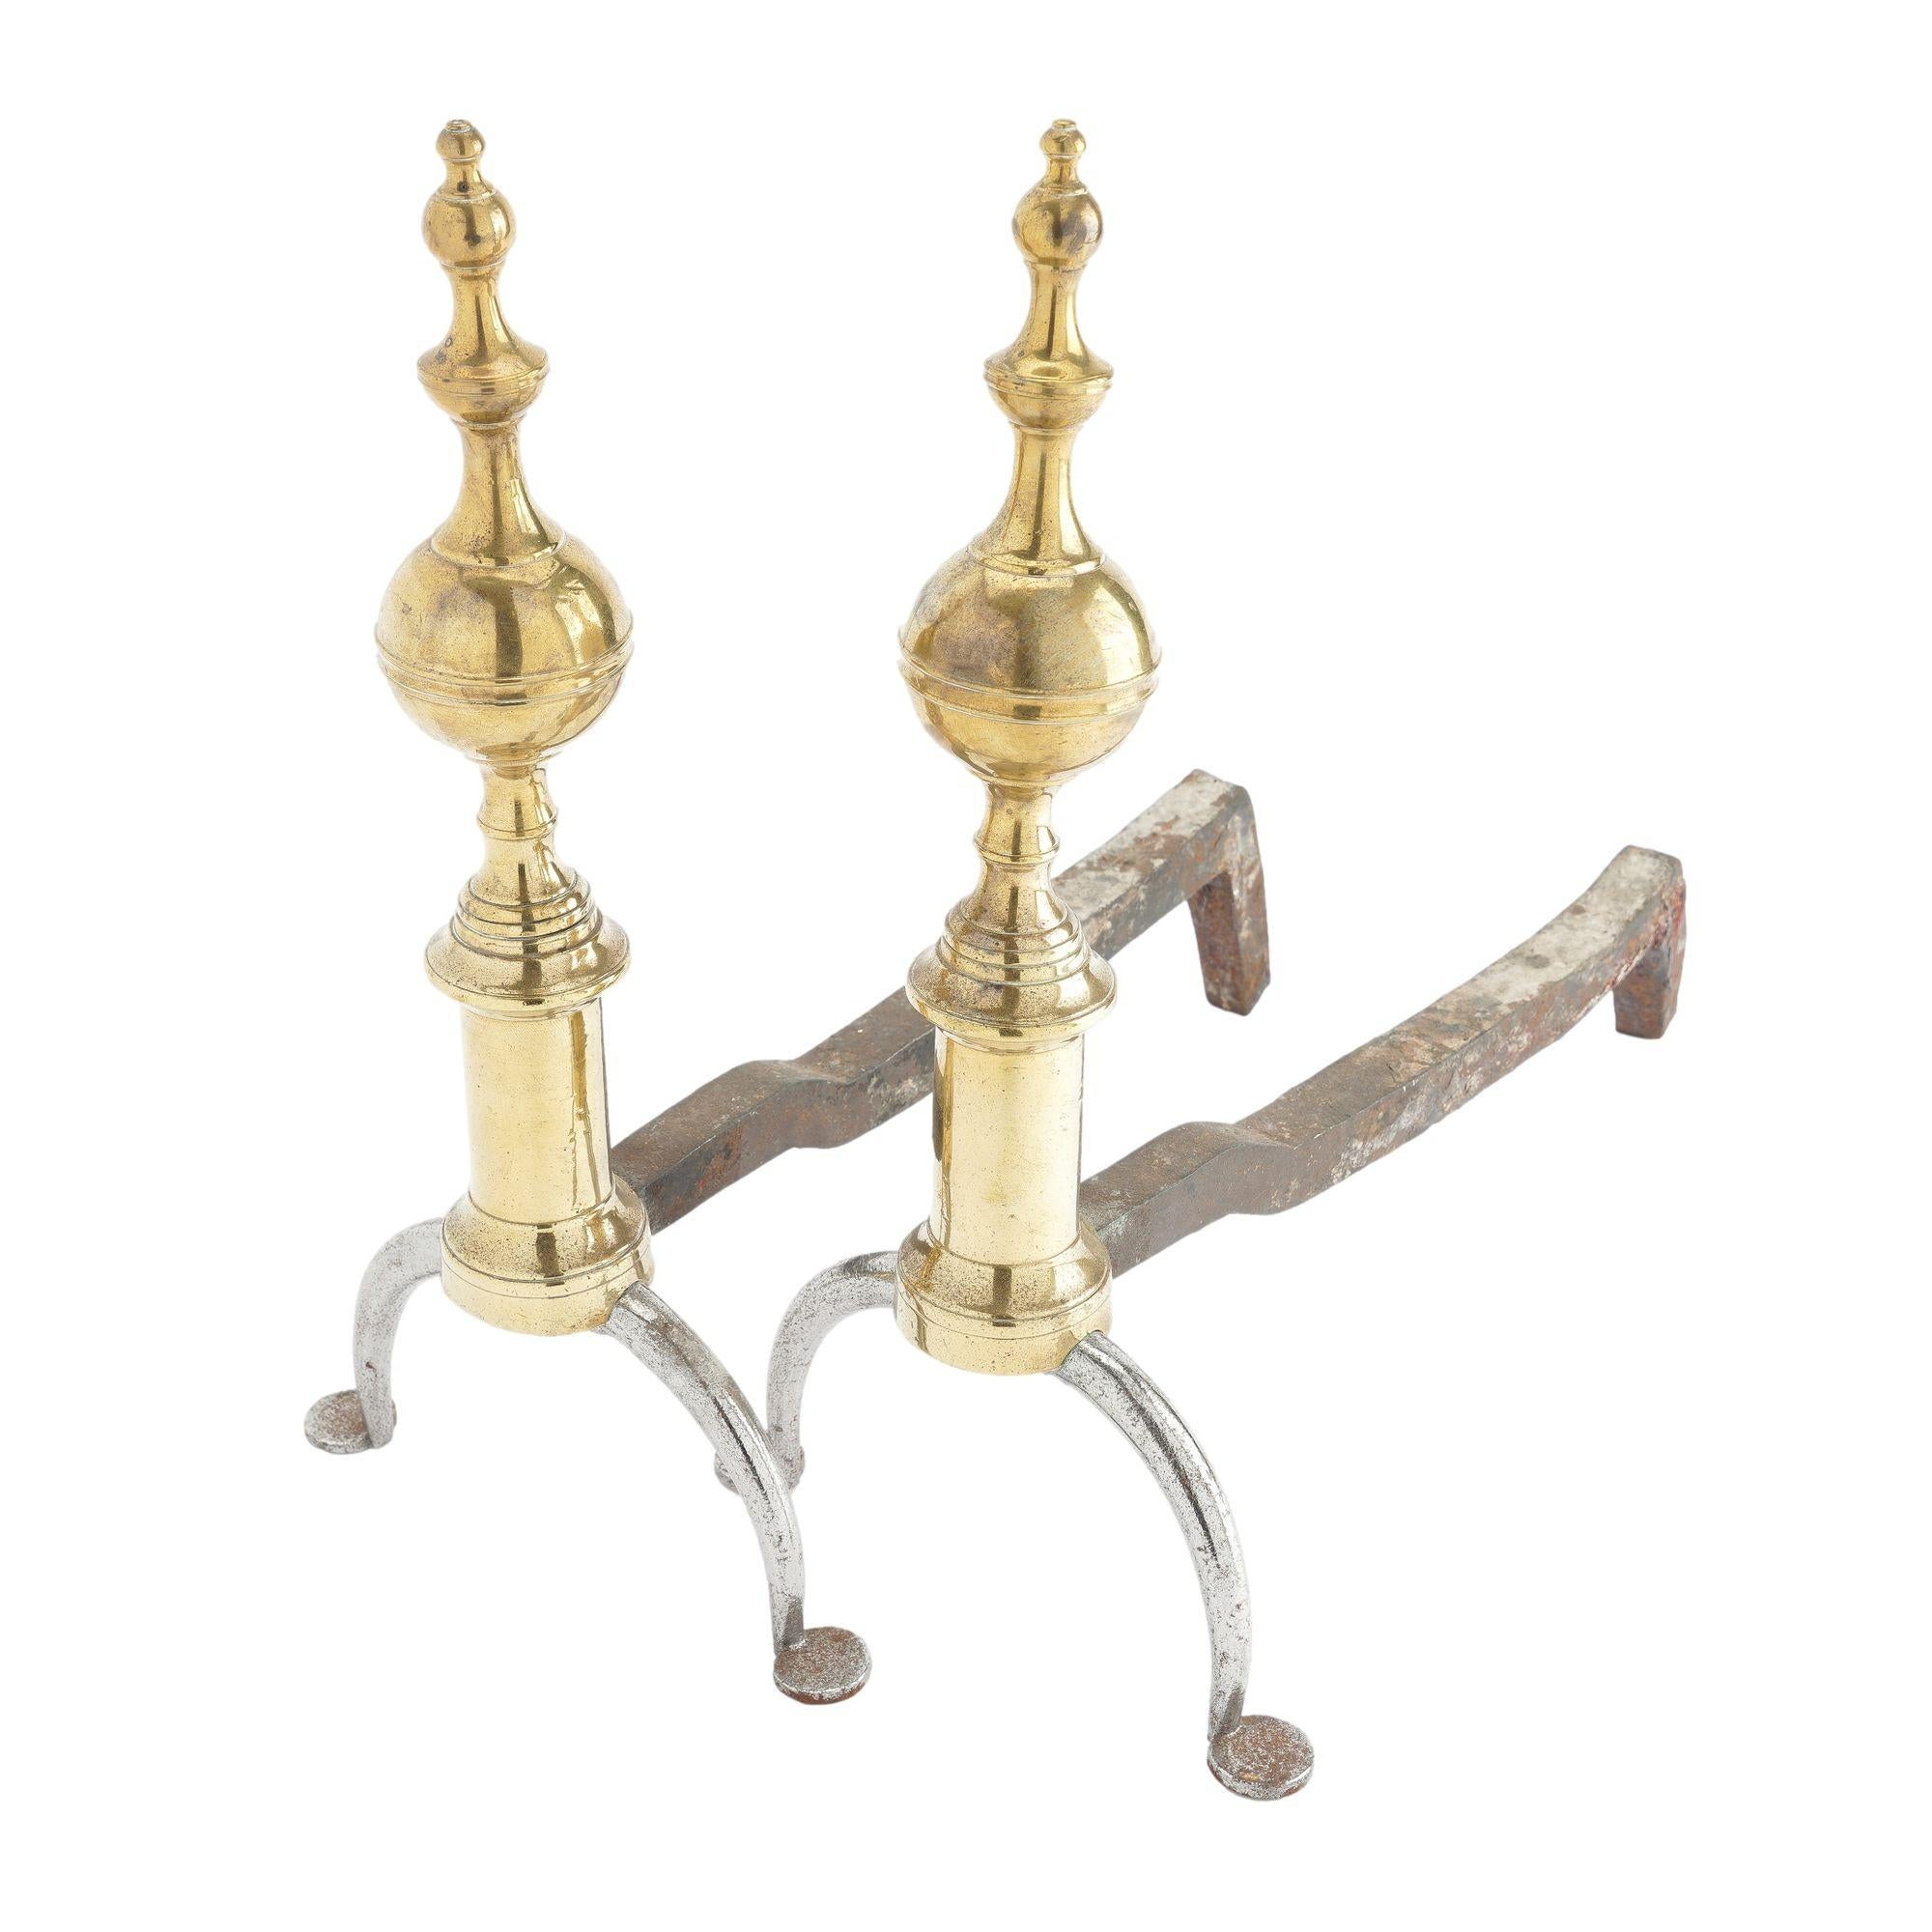 Pair of cast brass and forged iron steeple top andirons. Note the use of a forged iron leg with penny feet, which is an hallmark of the conservative use of brass during the period of the War of 1812.

New York, circa 1812-15.